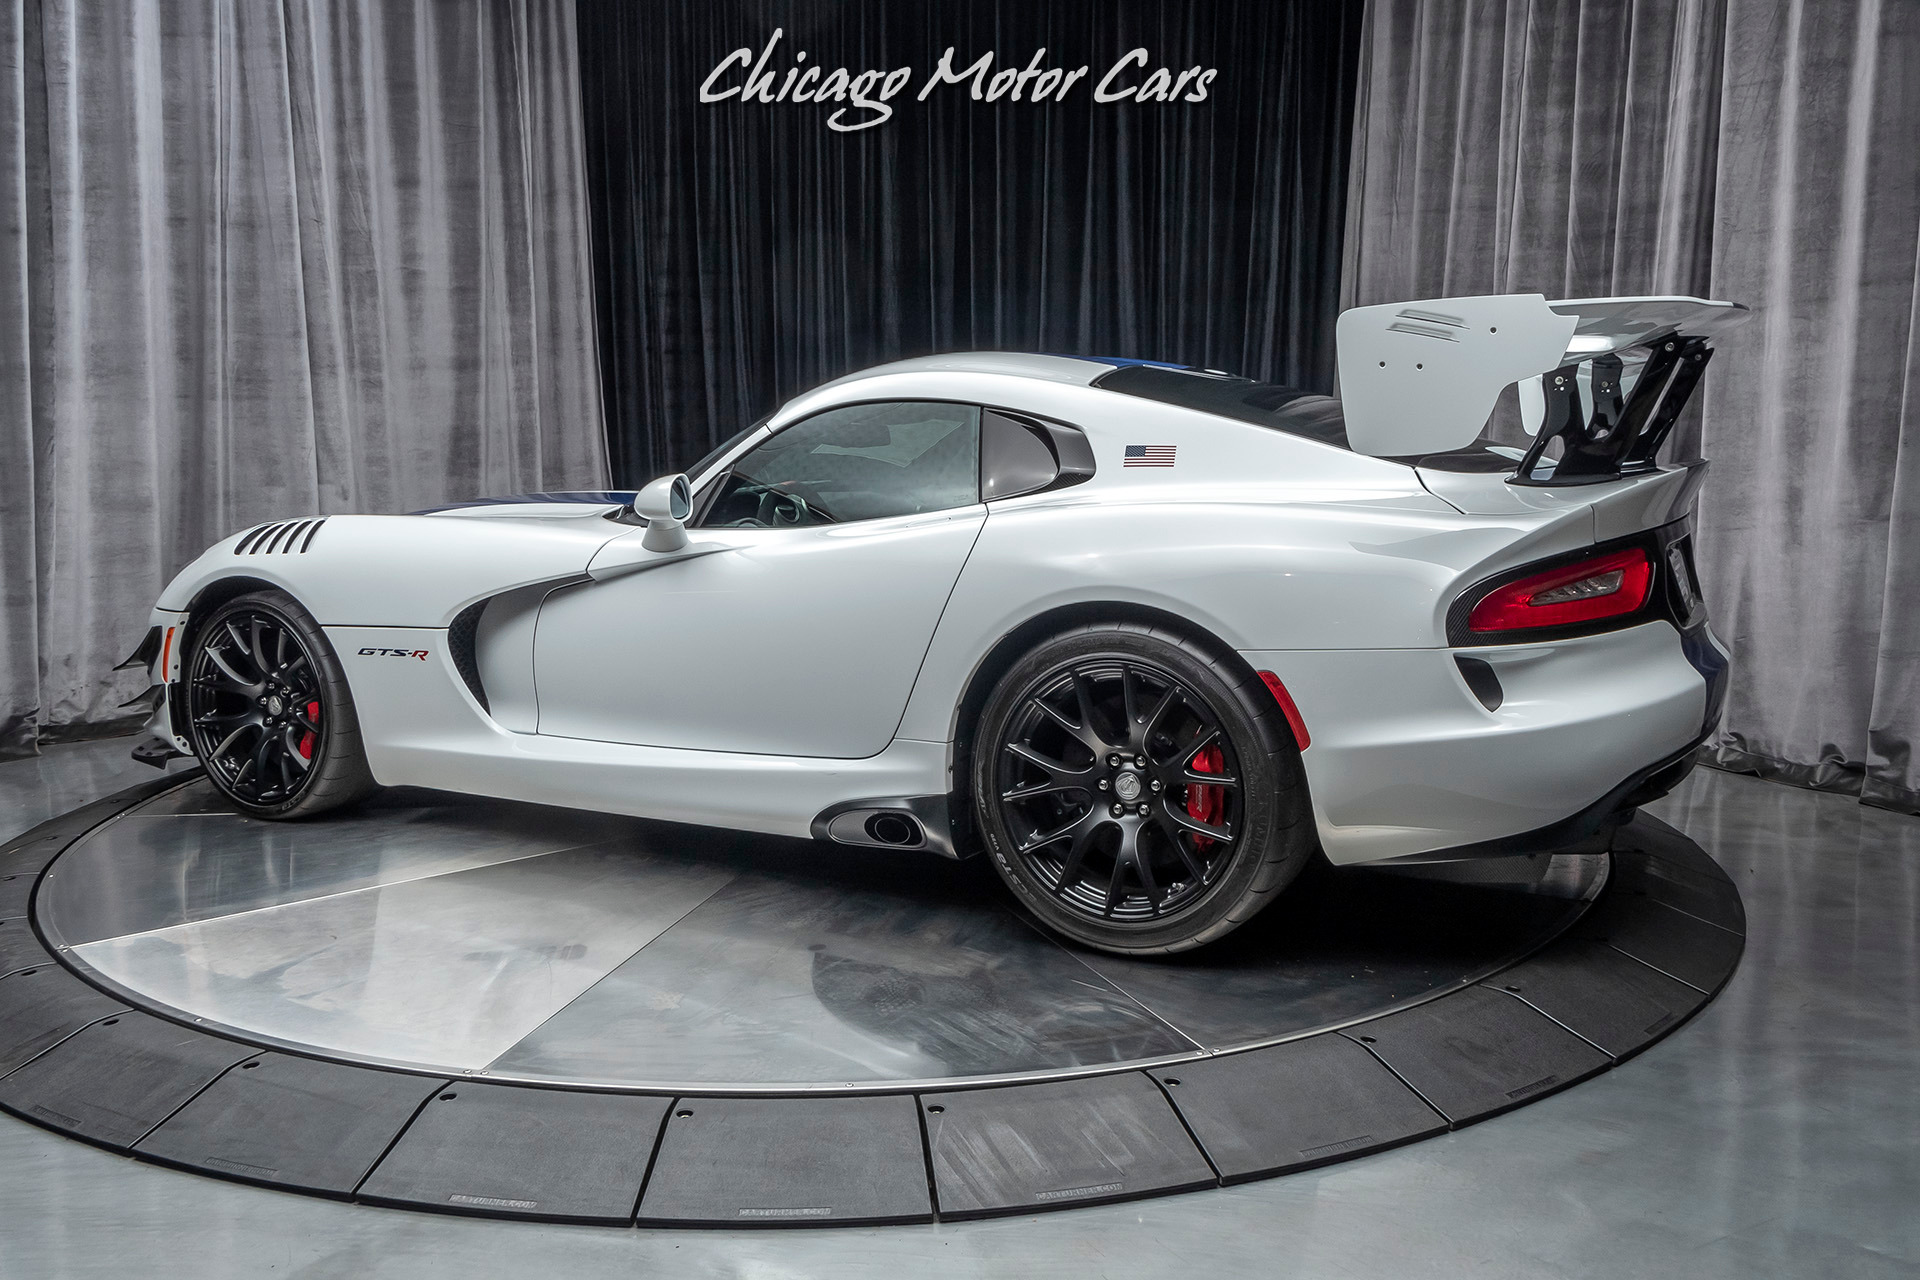 Used-2017-Dodge-Viper-ACR-GTS-R-Commemorative-Edition-1of100-Made-ONLY-15-MILES